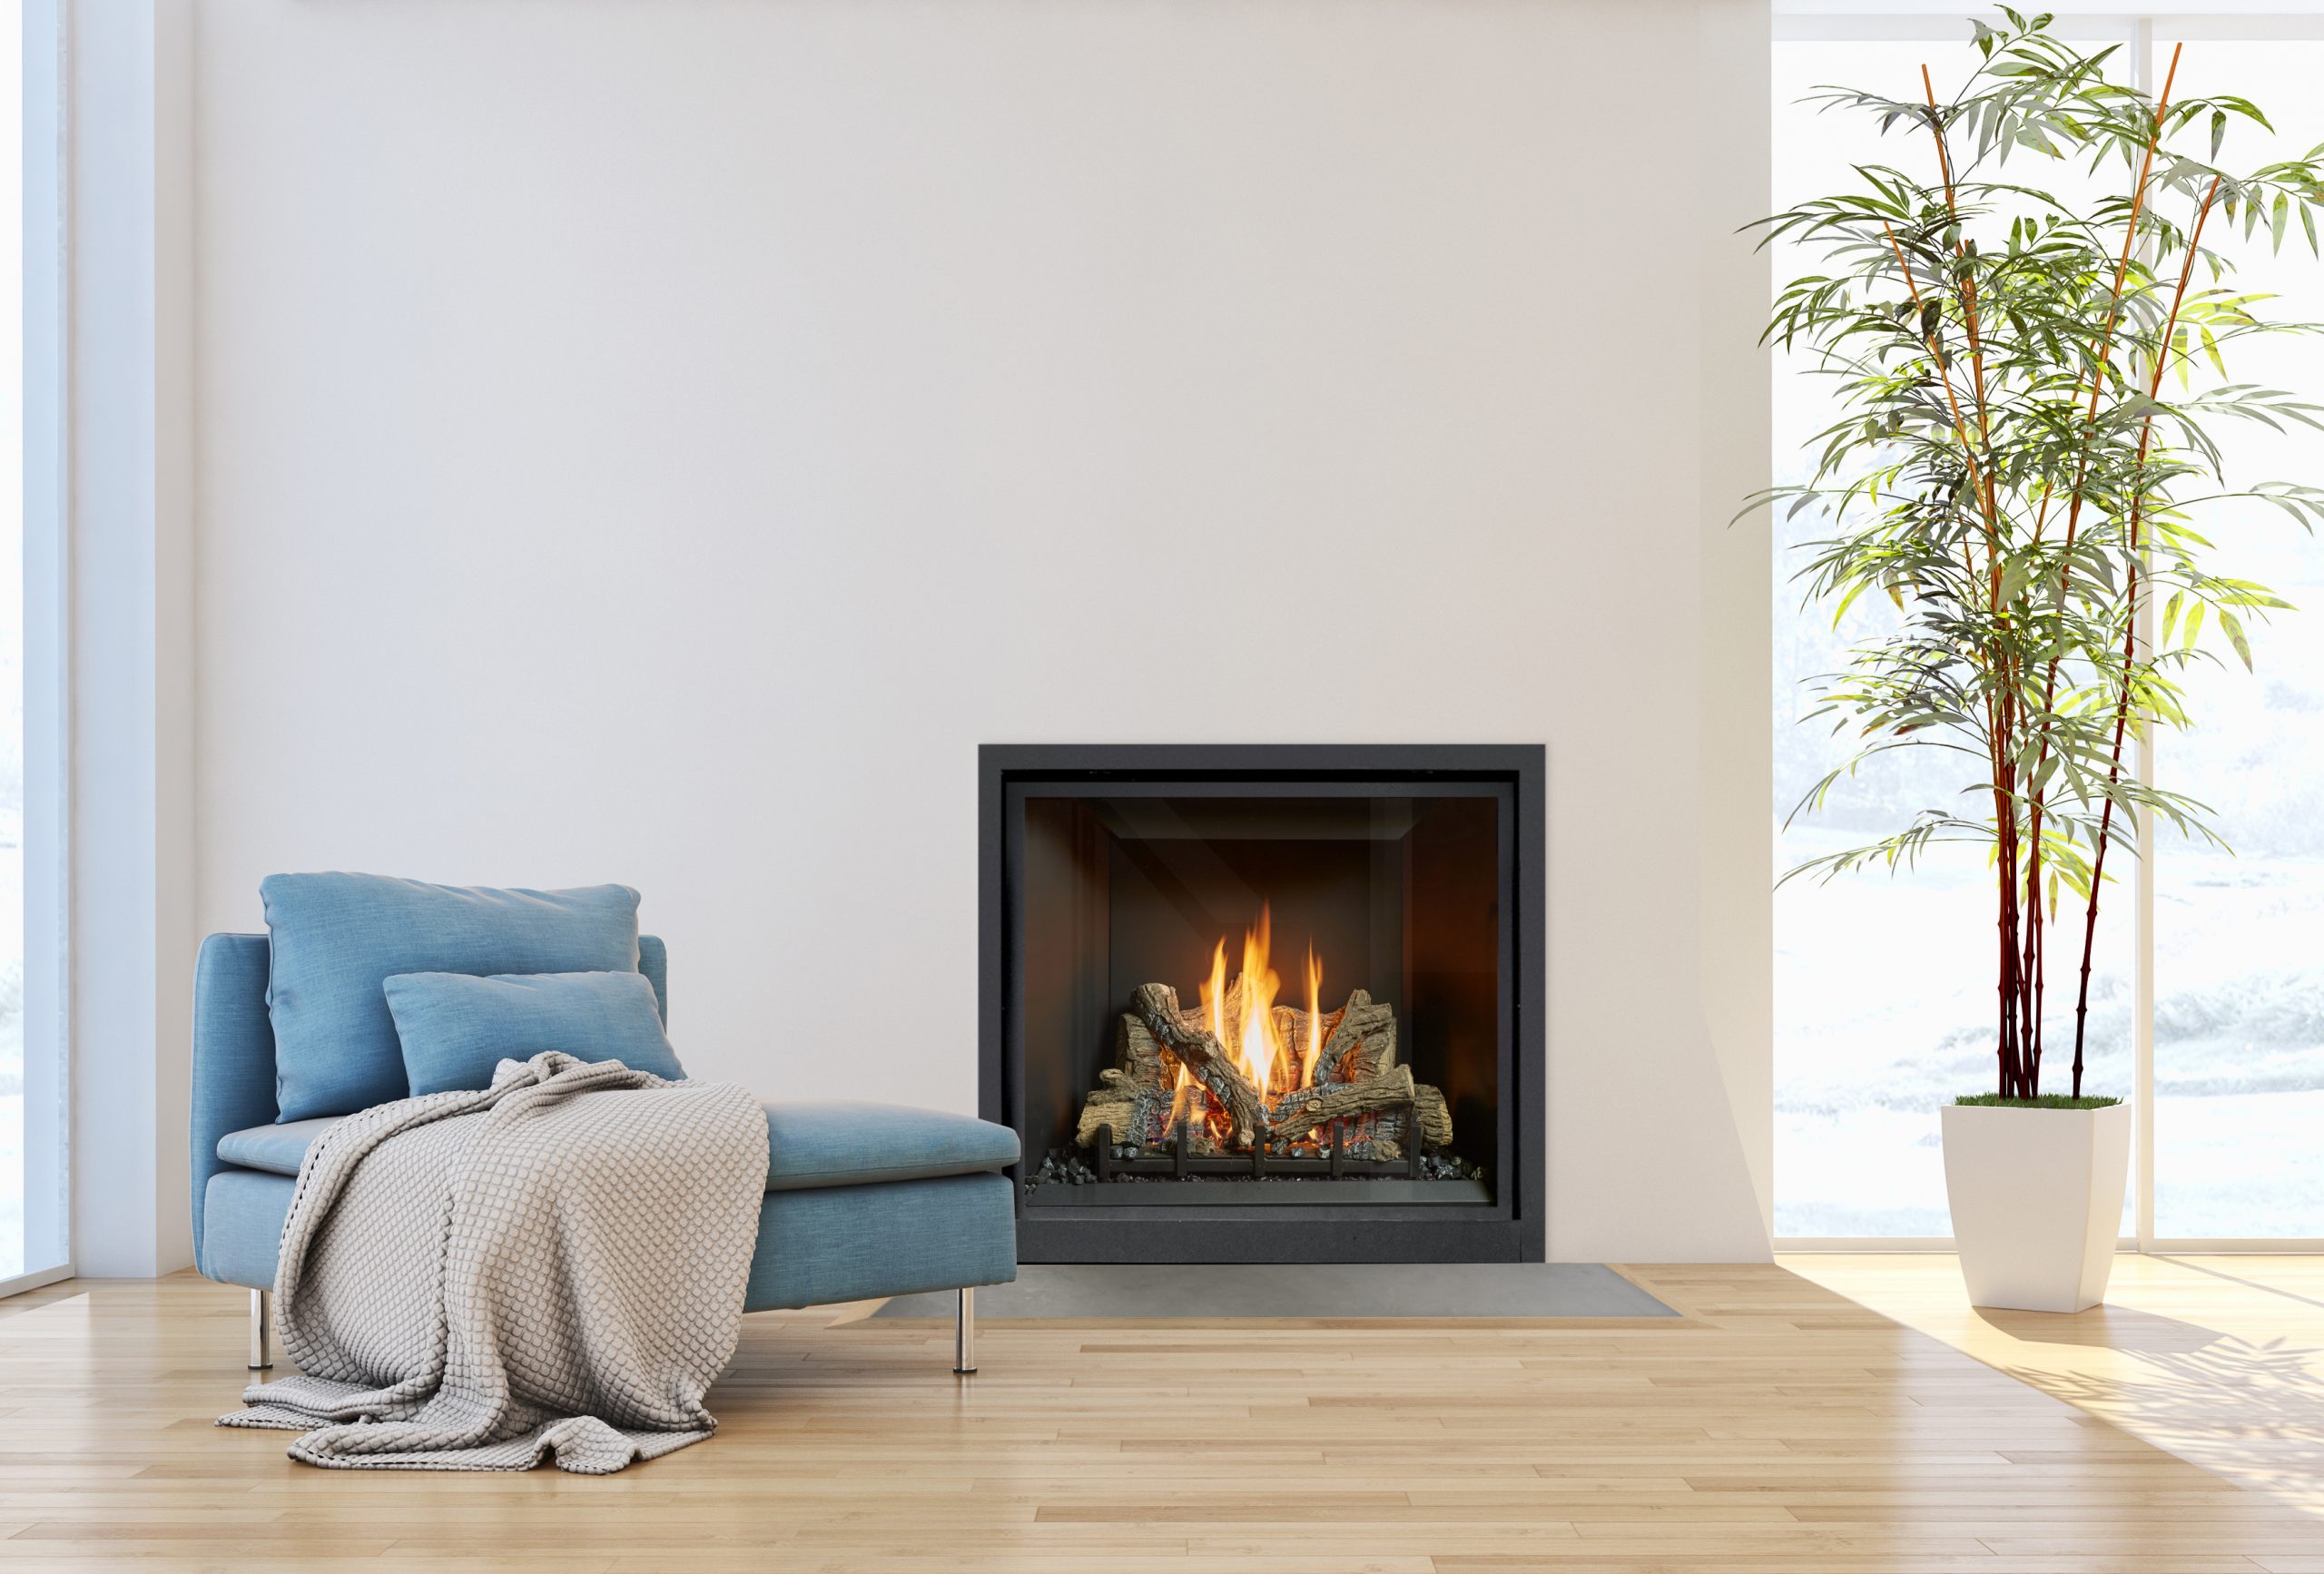 FREESTANDING OR BUILT-IN FIREPLACES – WHICH SHOULD YOU CHOOSE?